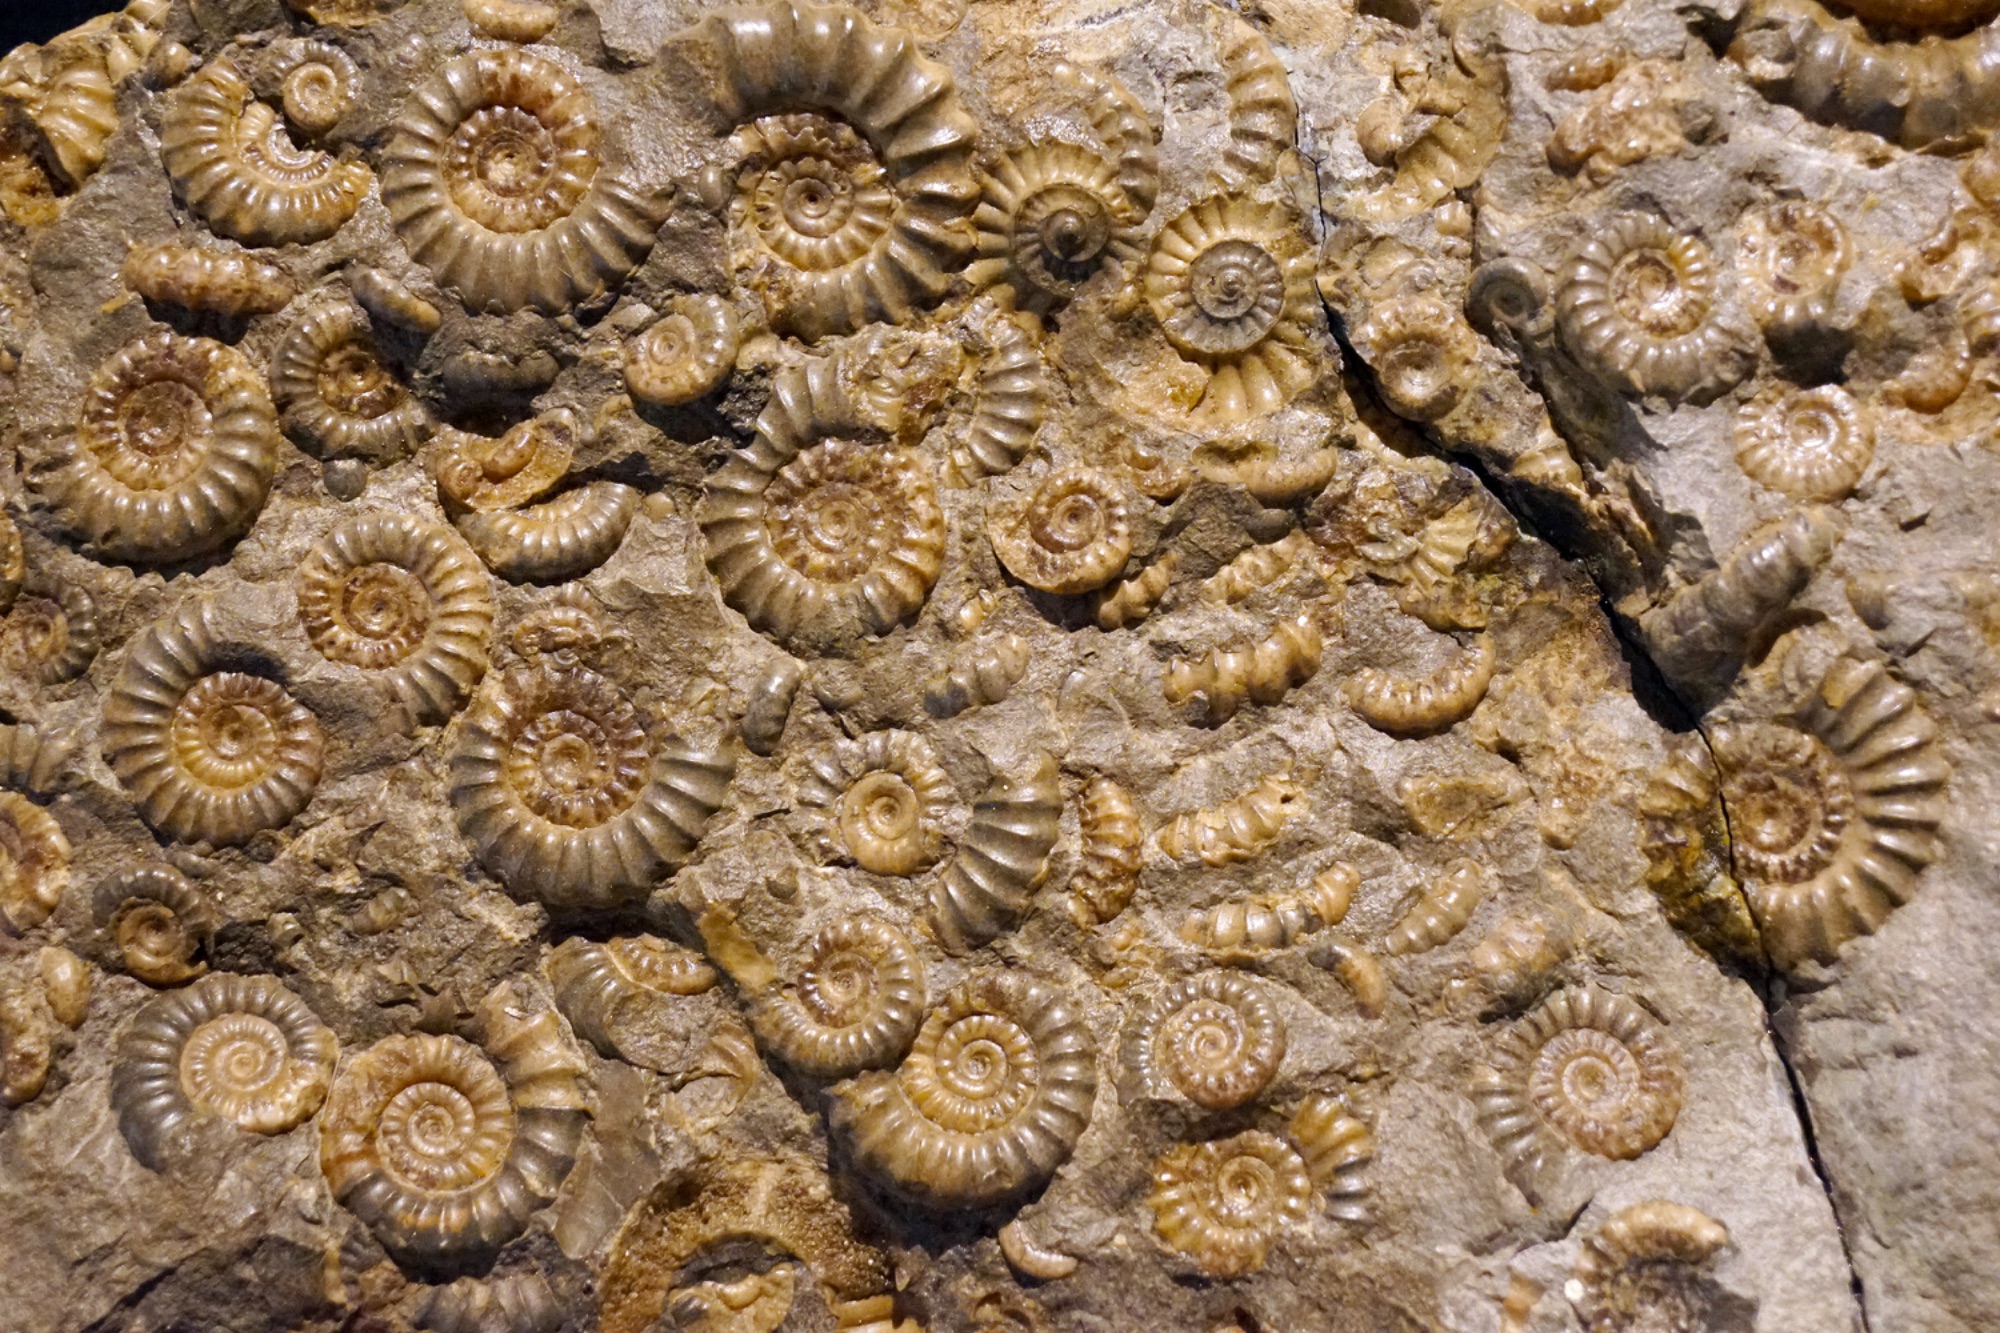 a large cluster of fossilised ammonites overlapping eachother and embedded into a light coloured sandy stone